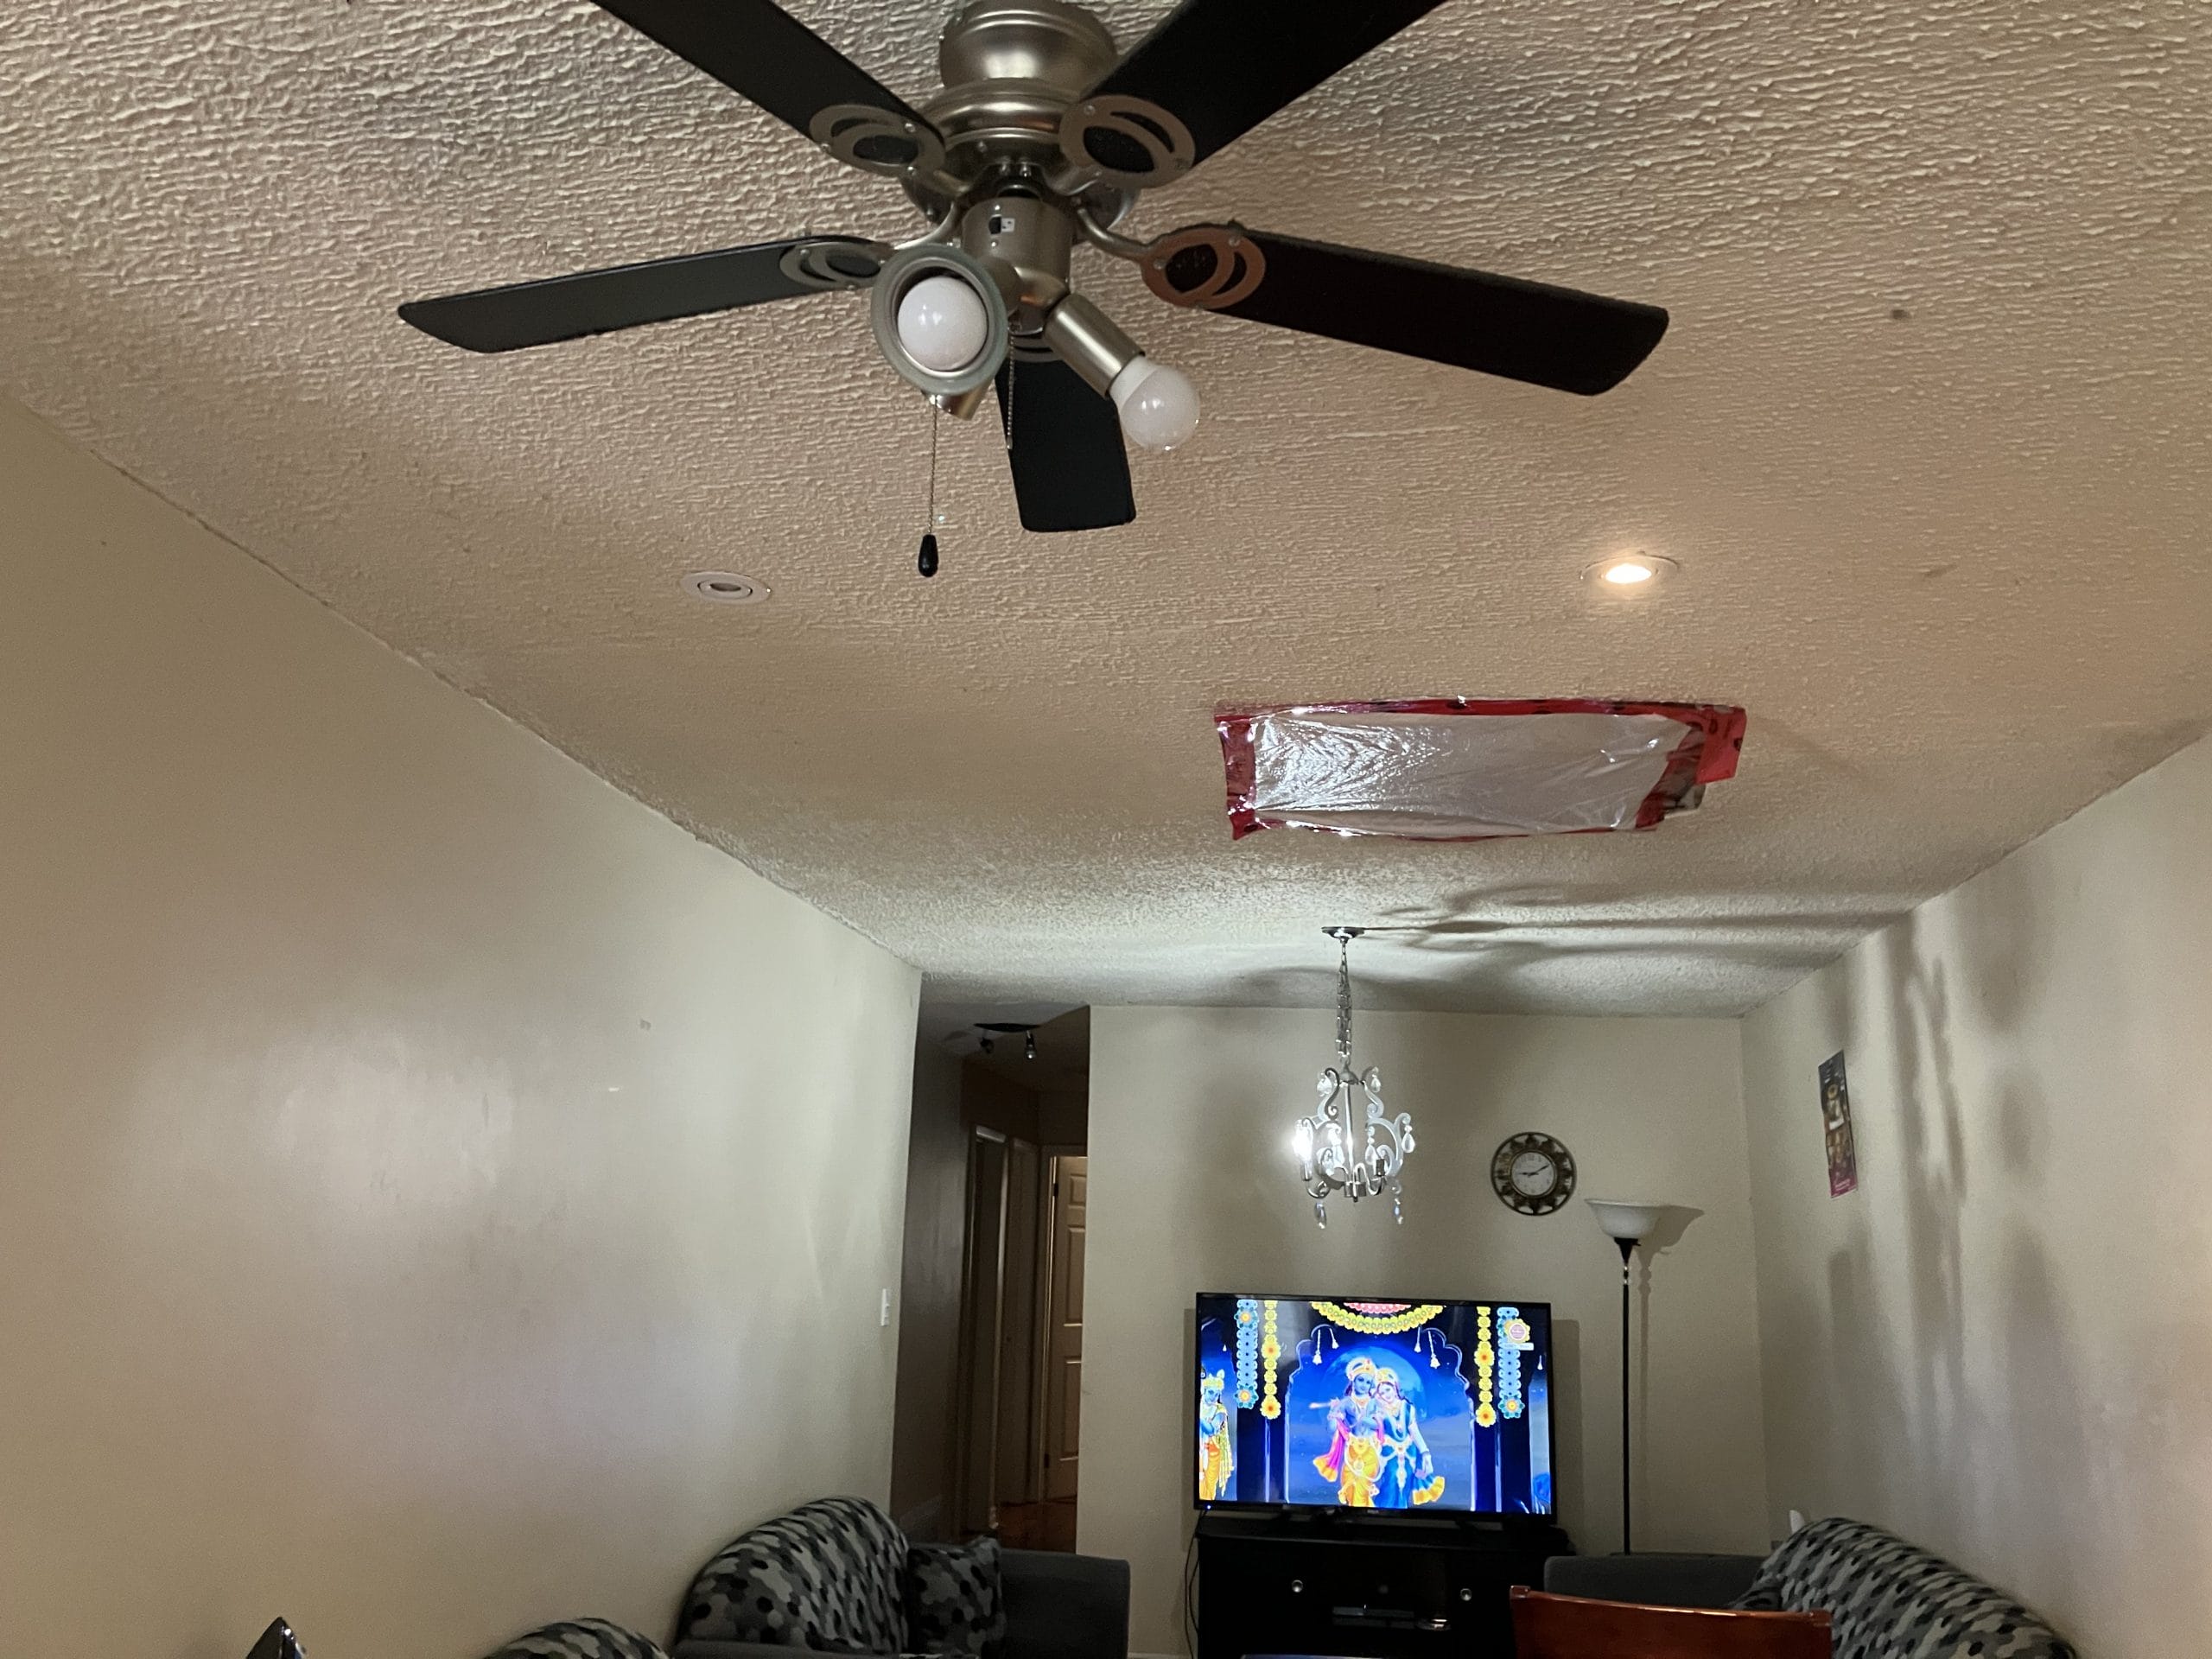 Yes ceiling is ready for popcorn ceiling removal